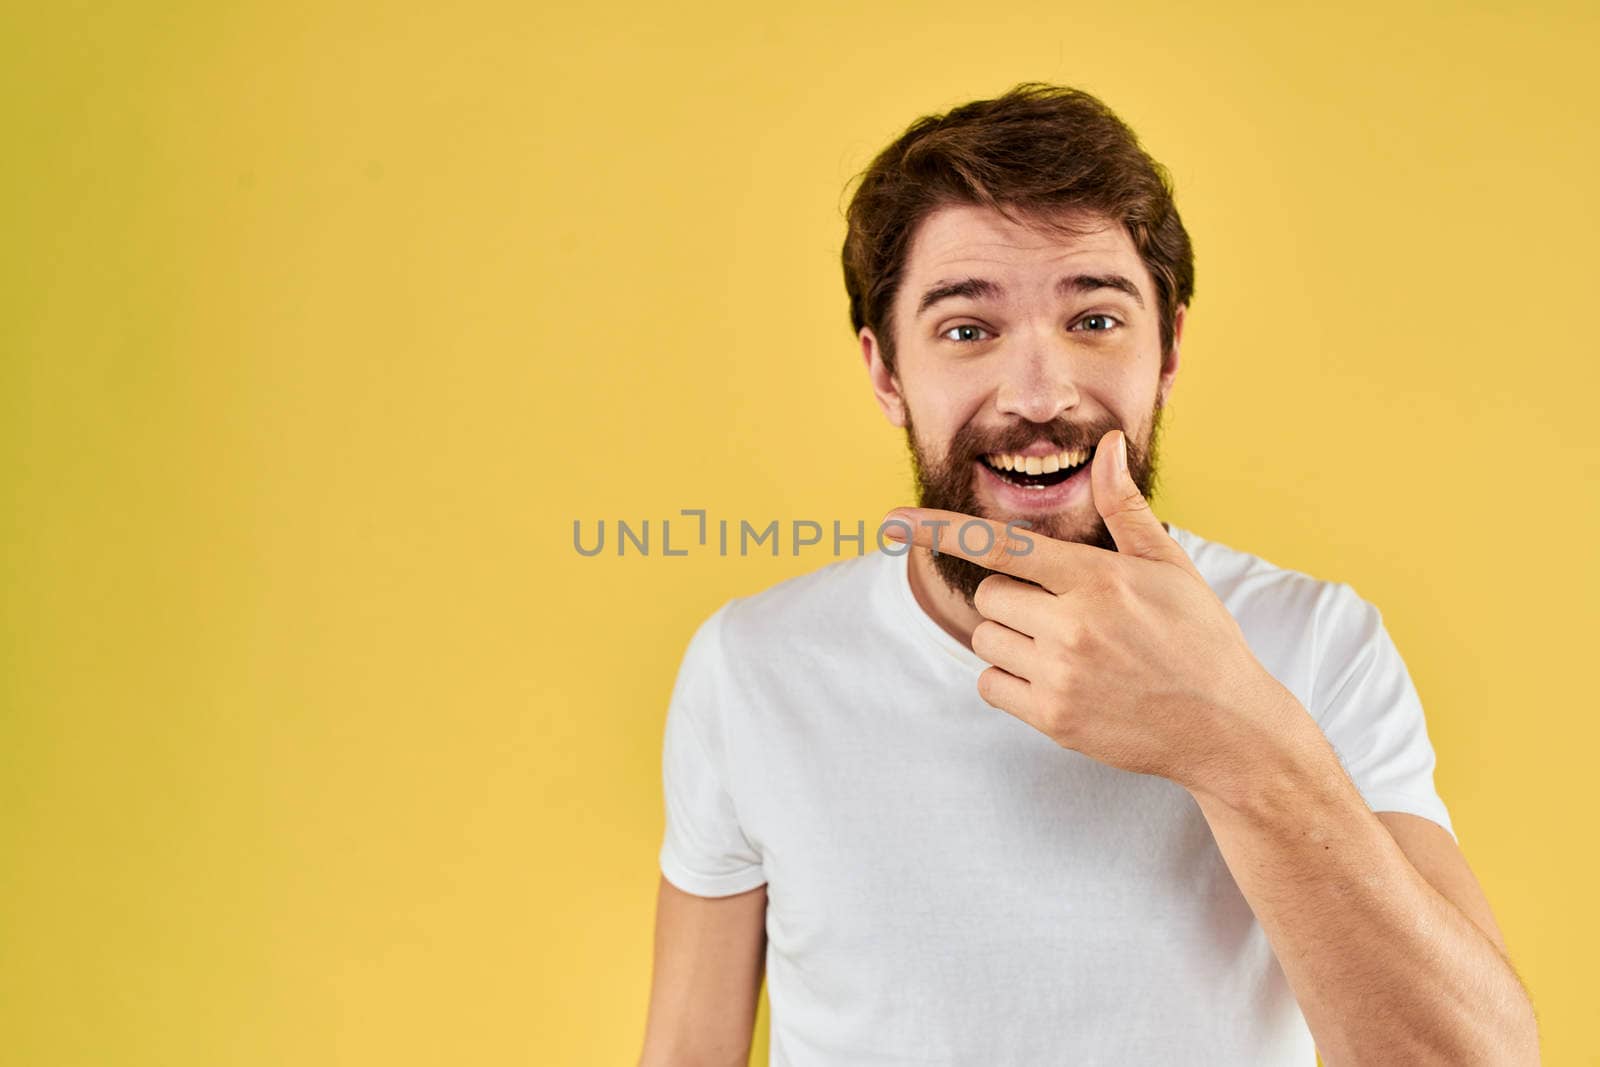 Bearded man emotions fun gesture with hands white t-shirt close-up yellow background by SHOTPRIME